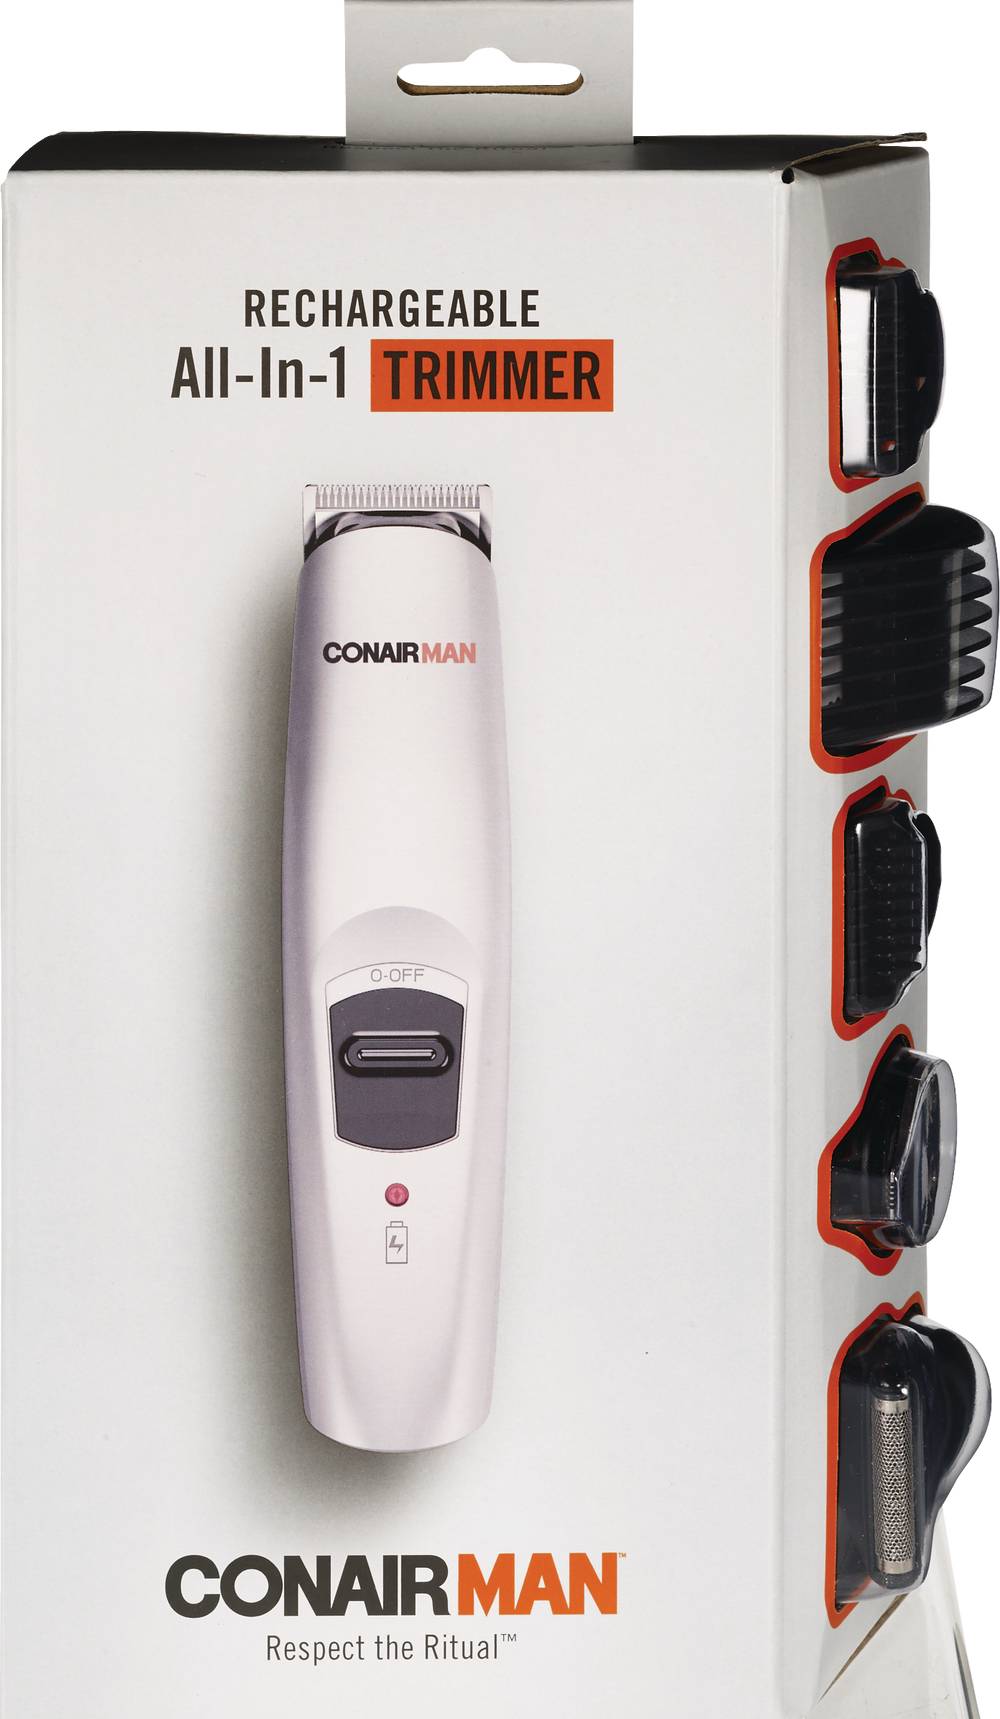 Conair All-In-1 Rechargeable Trimmer